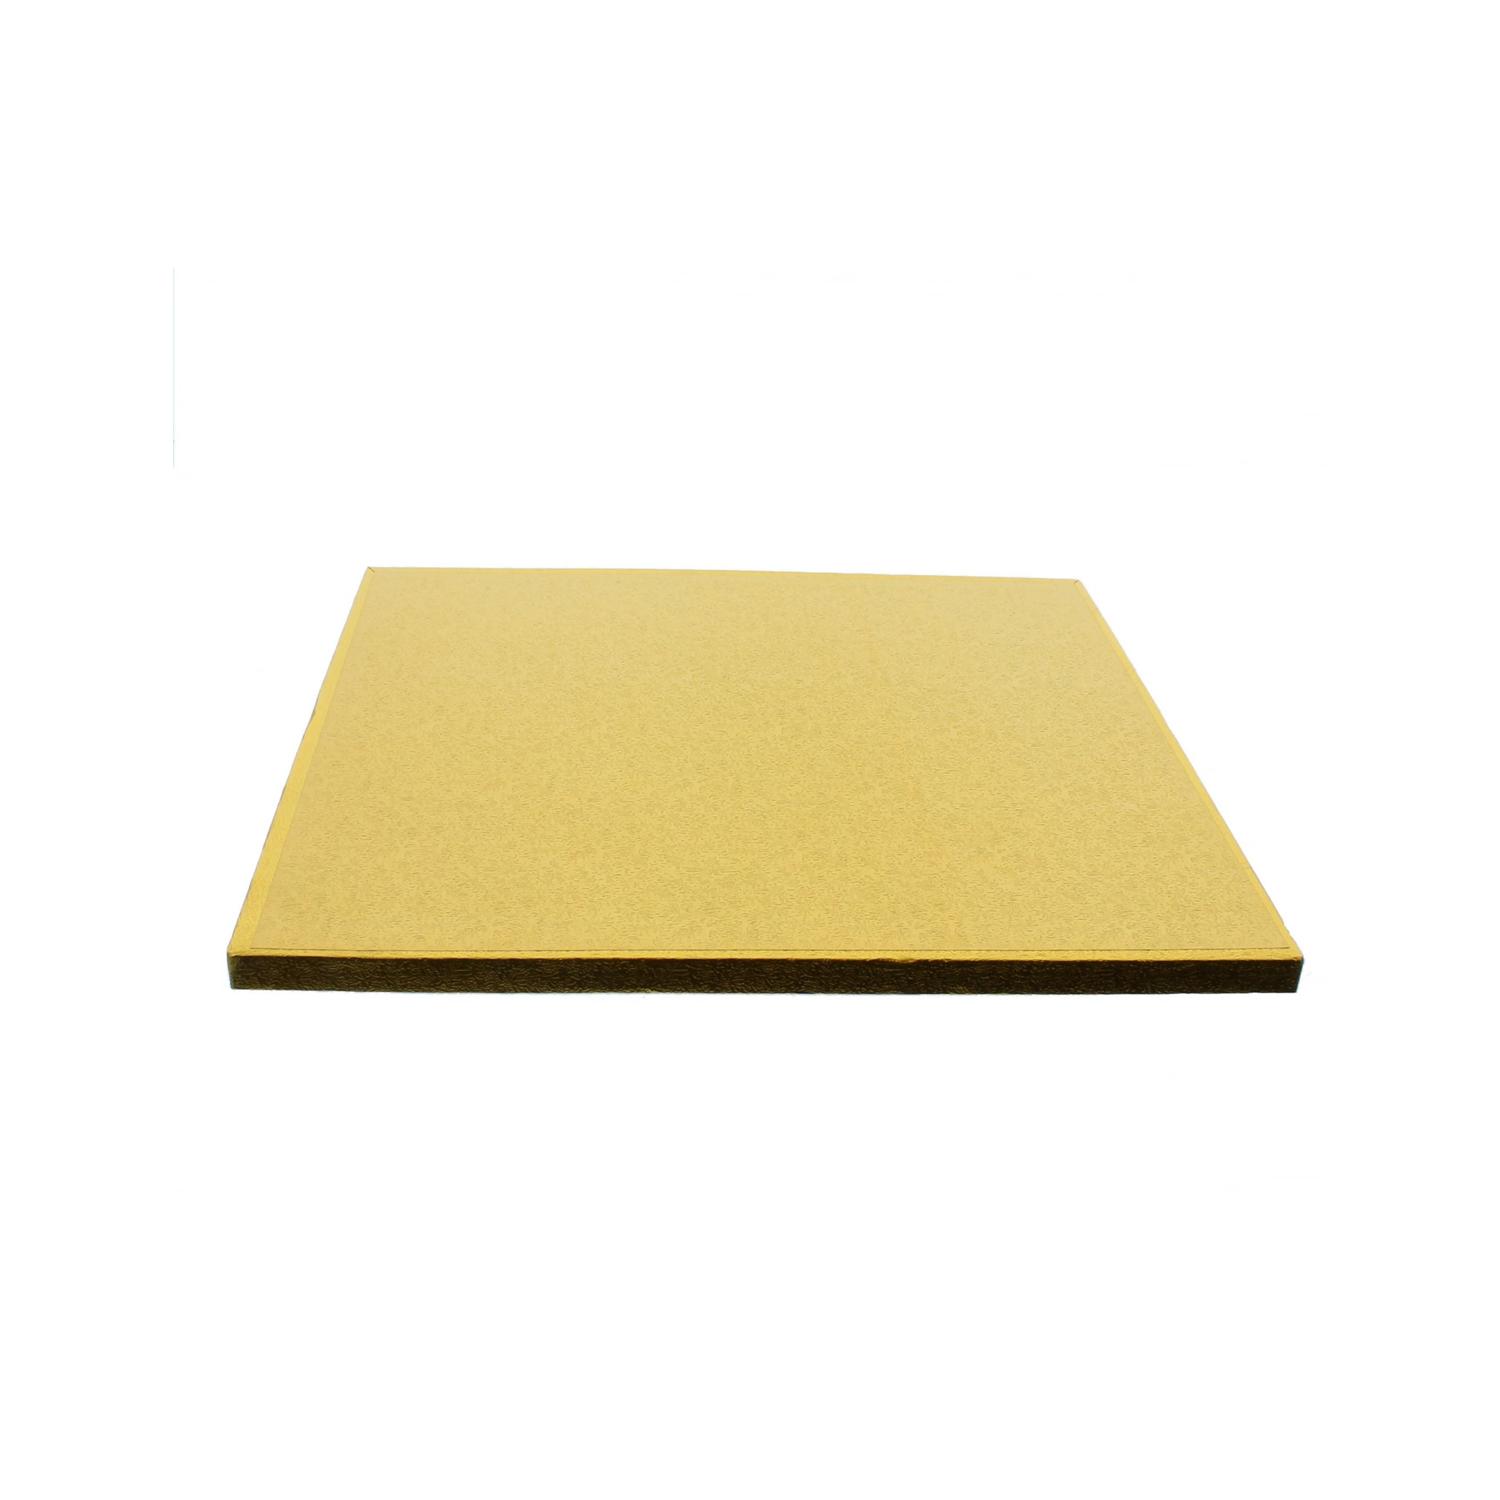 4'' SQUARE SMOOTH GOLD CAKE BOARD